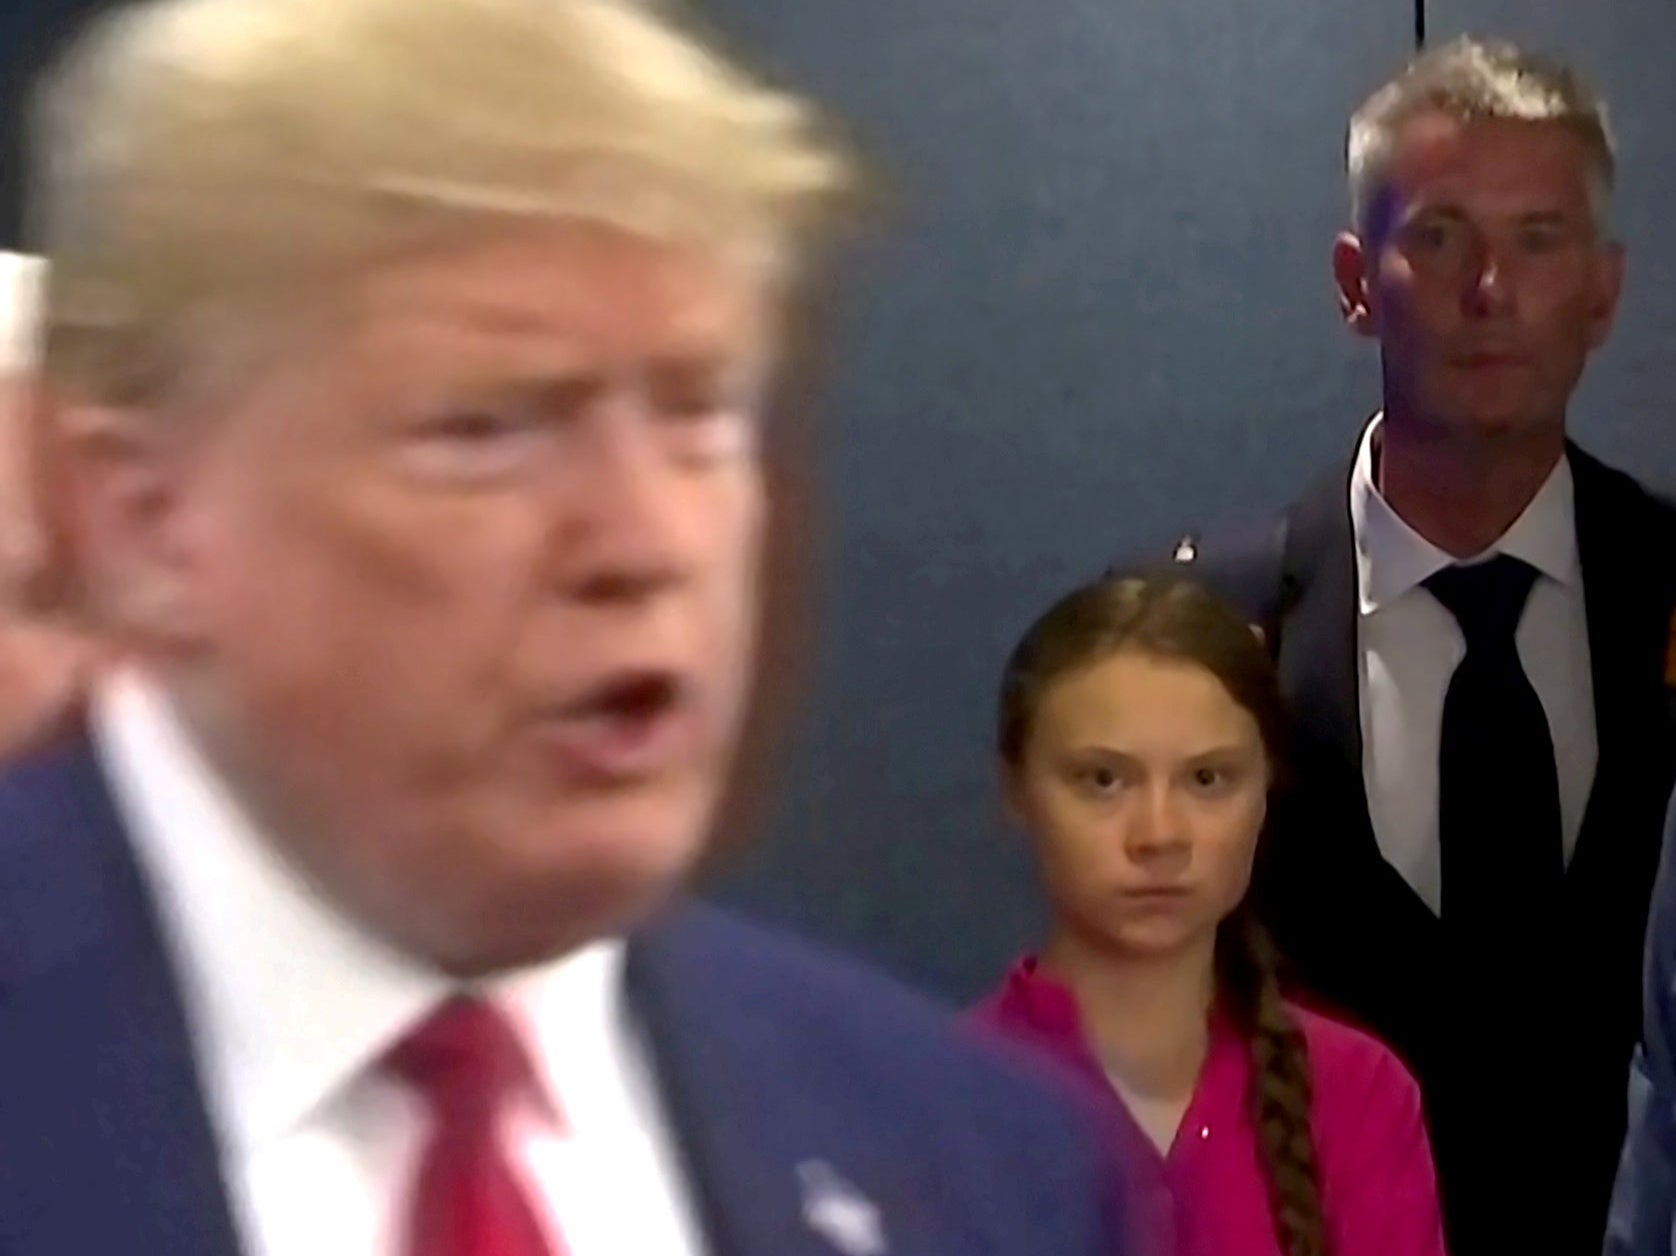 Greta Thunberg watches as President Trump enters the United Nations to speak with reporters in a still image from video taken in New York City, on 23 September 2019